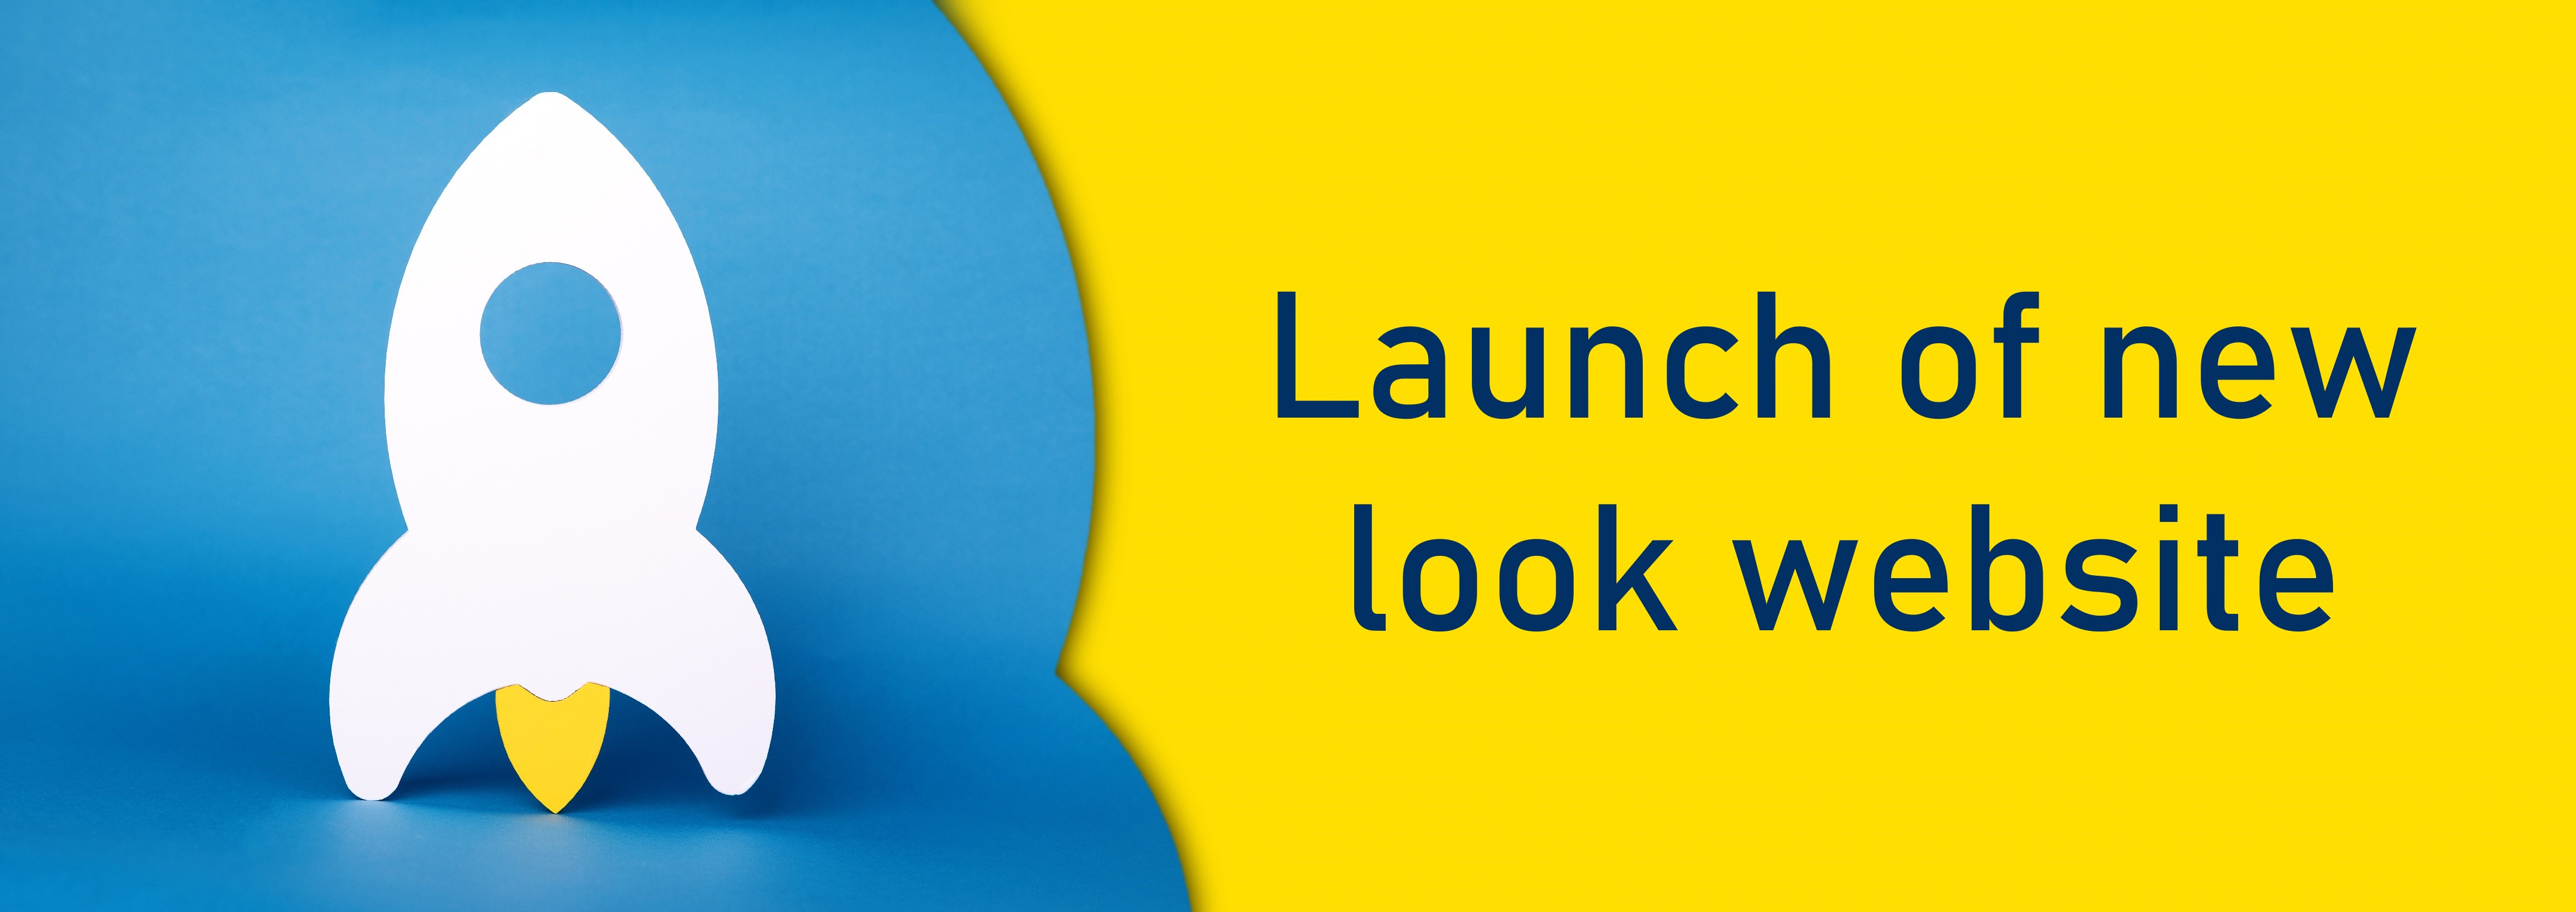 White rocket on blue background. To left of yellow background with blue text Launch of new look website